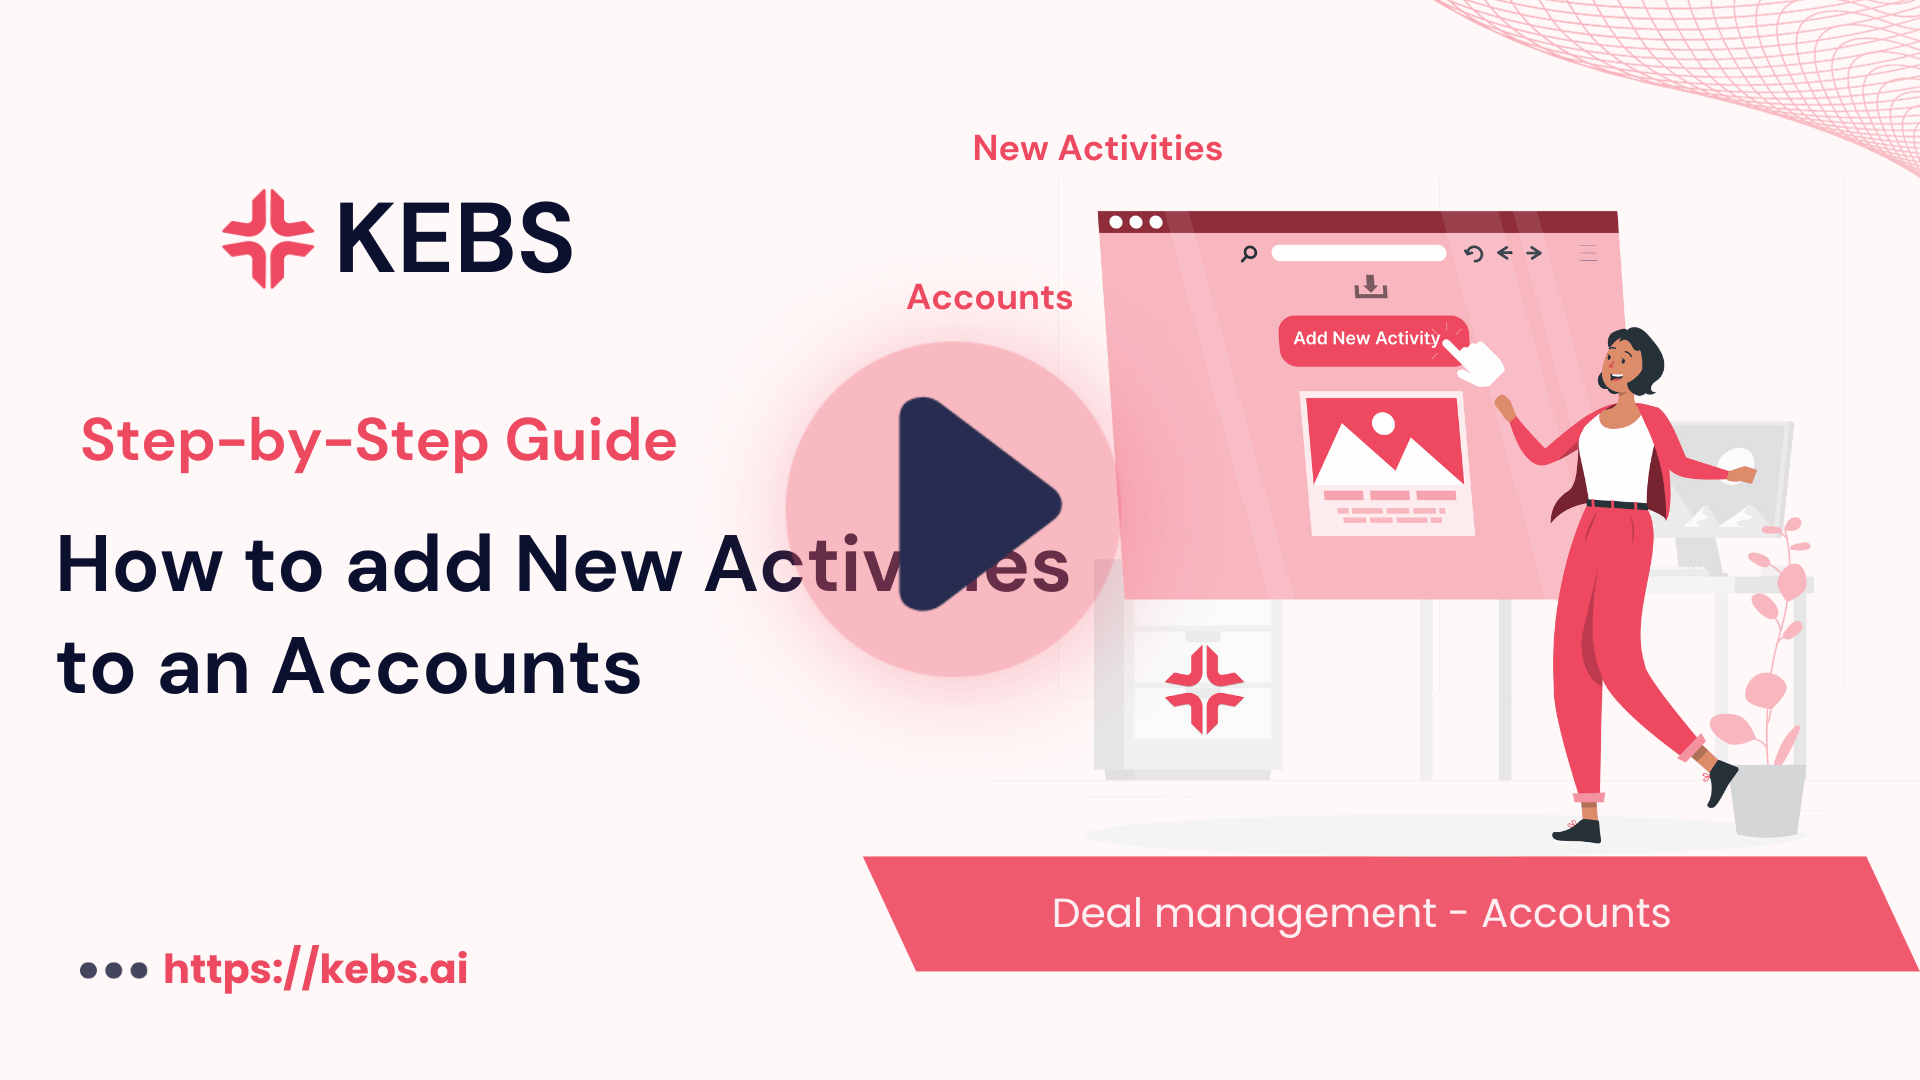 How to add New Activities to an Accounts